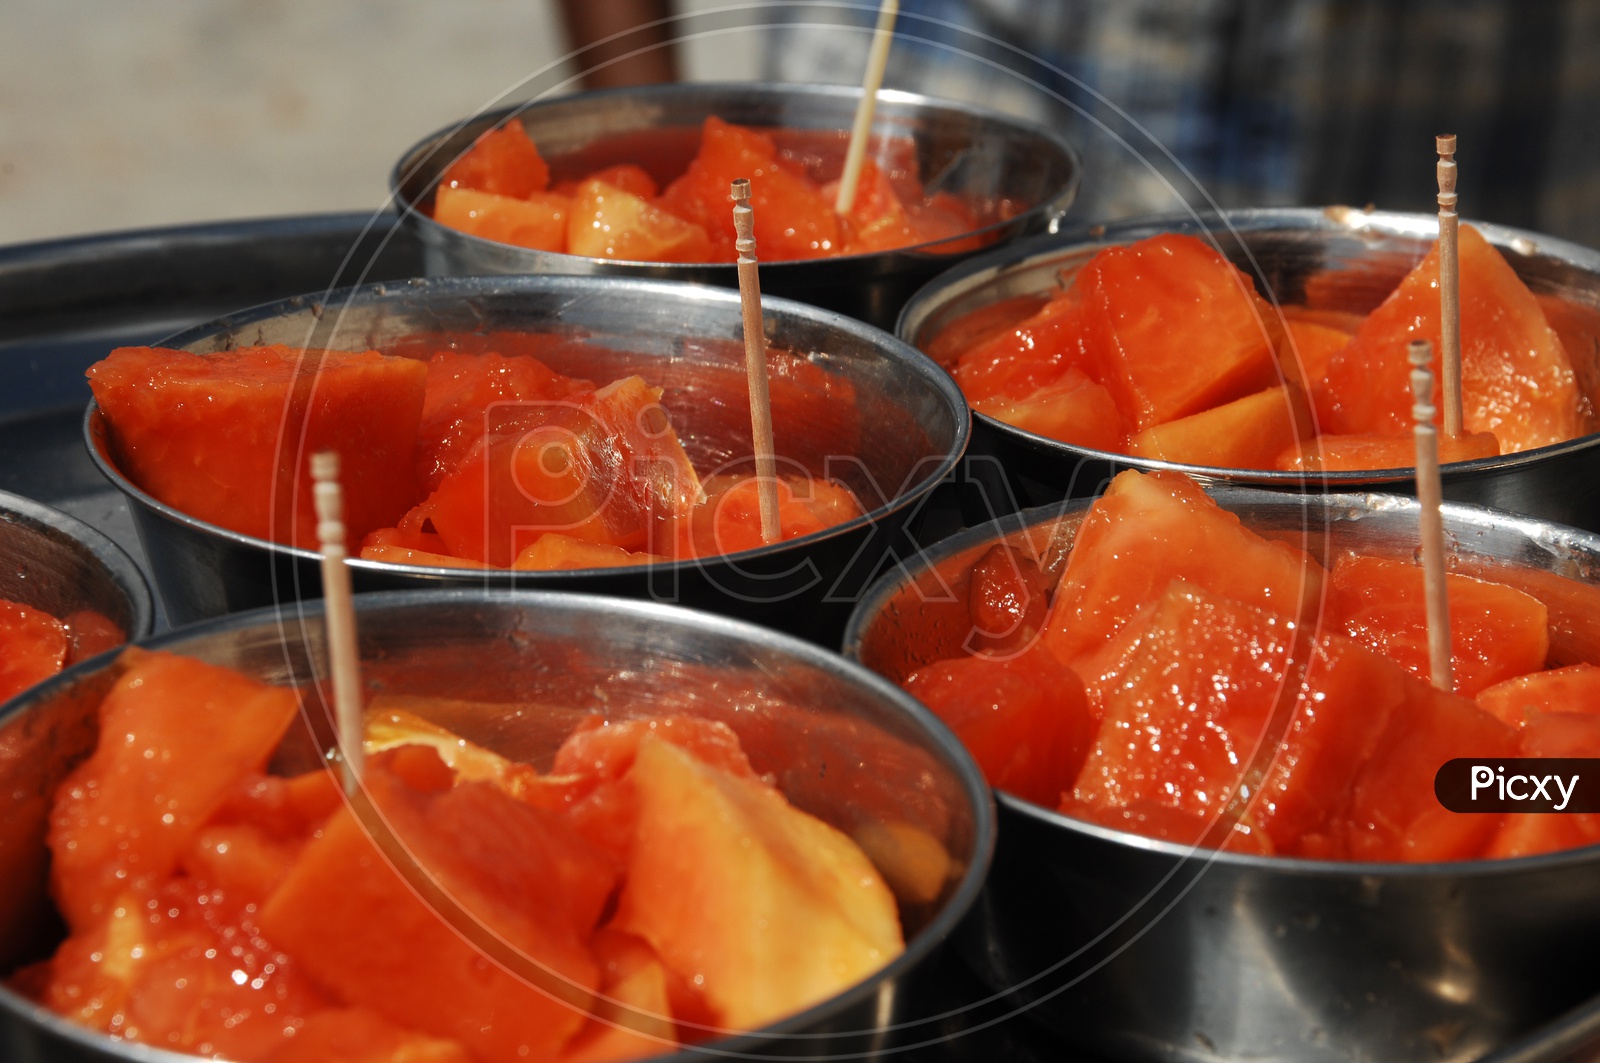 Photograph of Papaya fruit pieces served in steel bowls